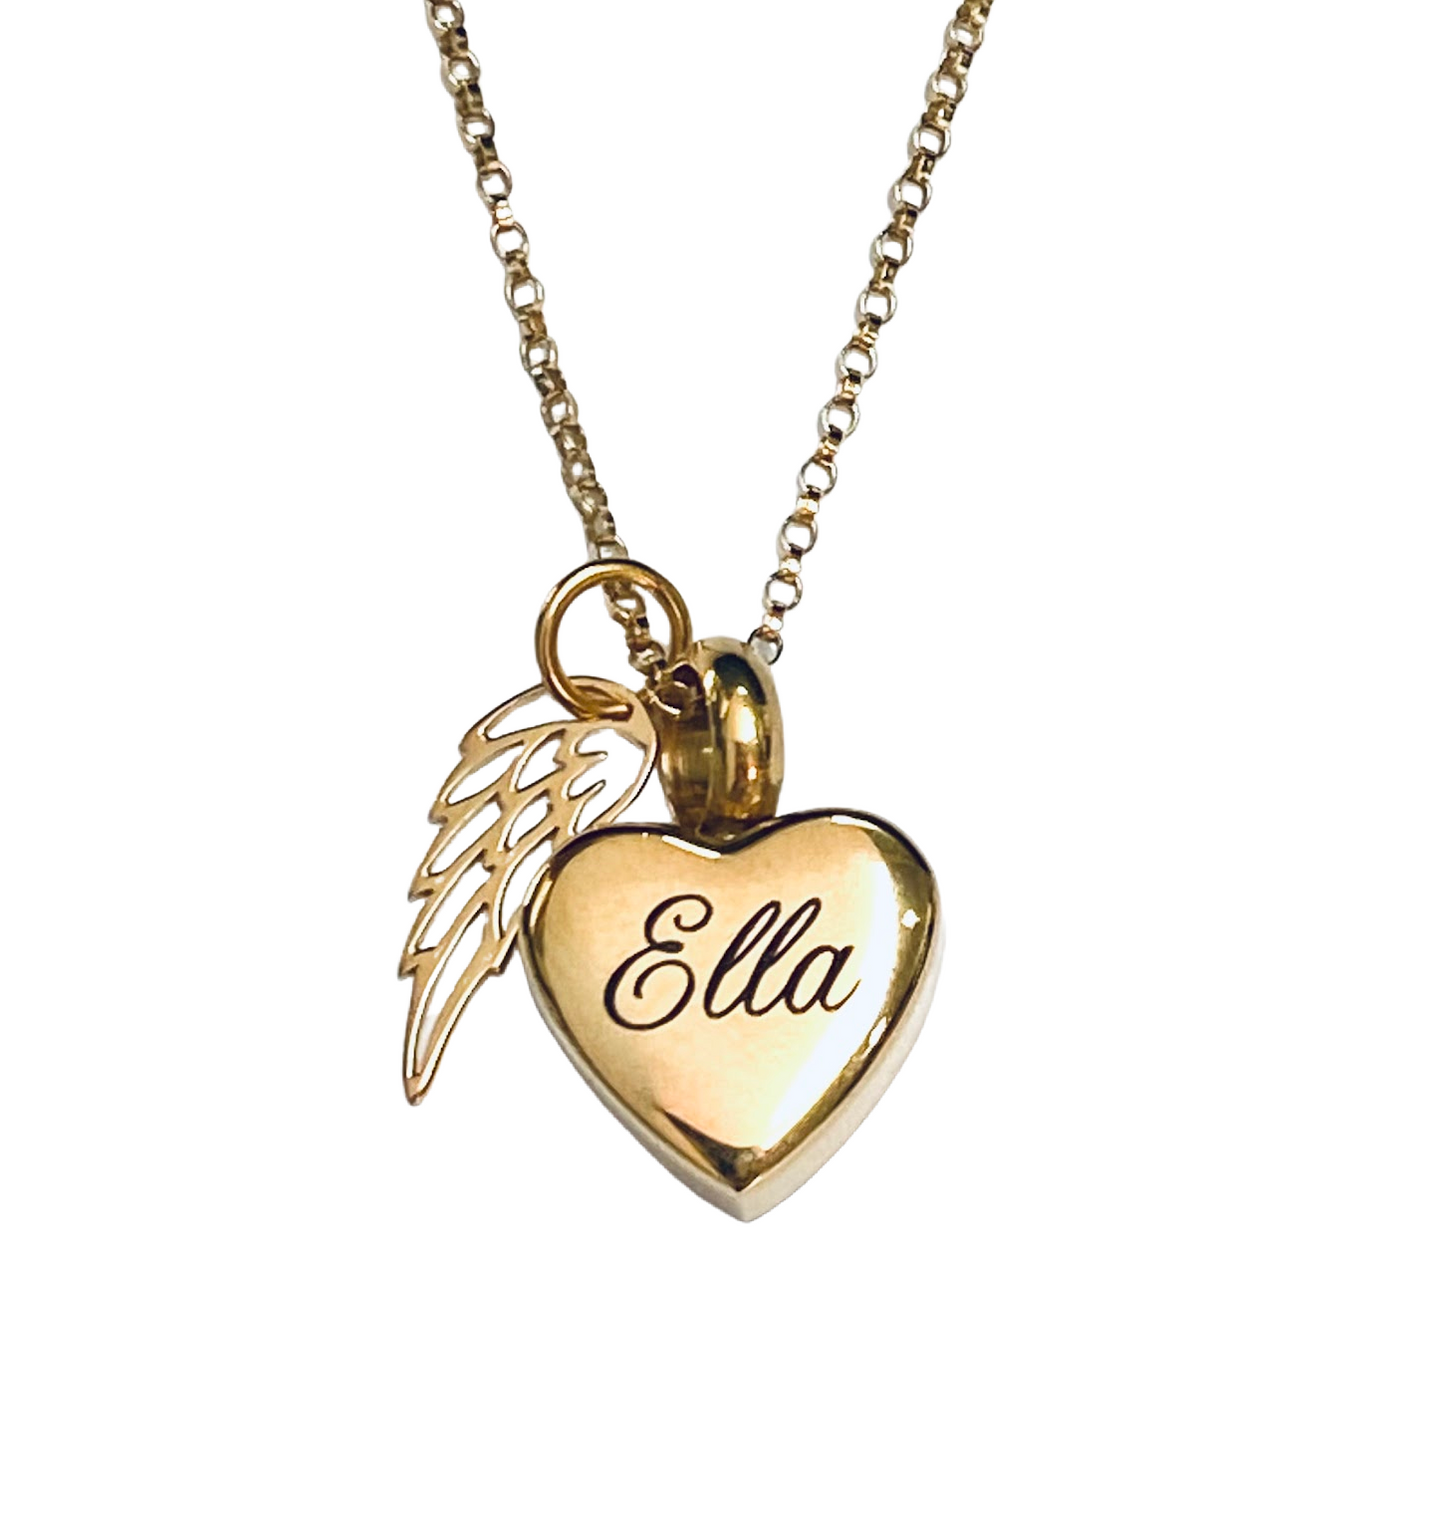 Petite Heart Gold Angel Wing Urn Necklace personalized with optional fingerprint